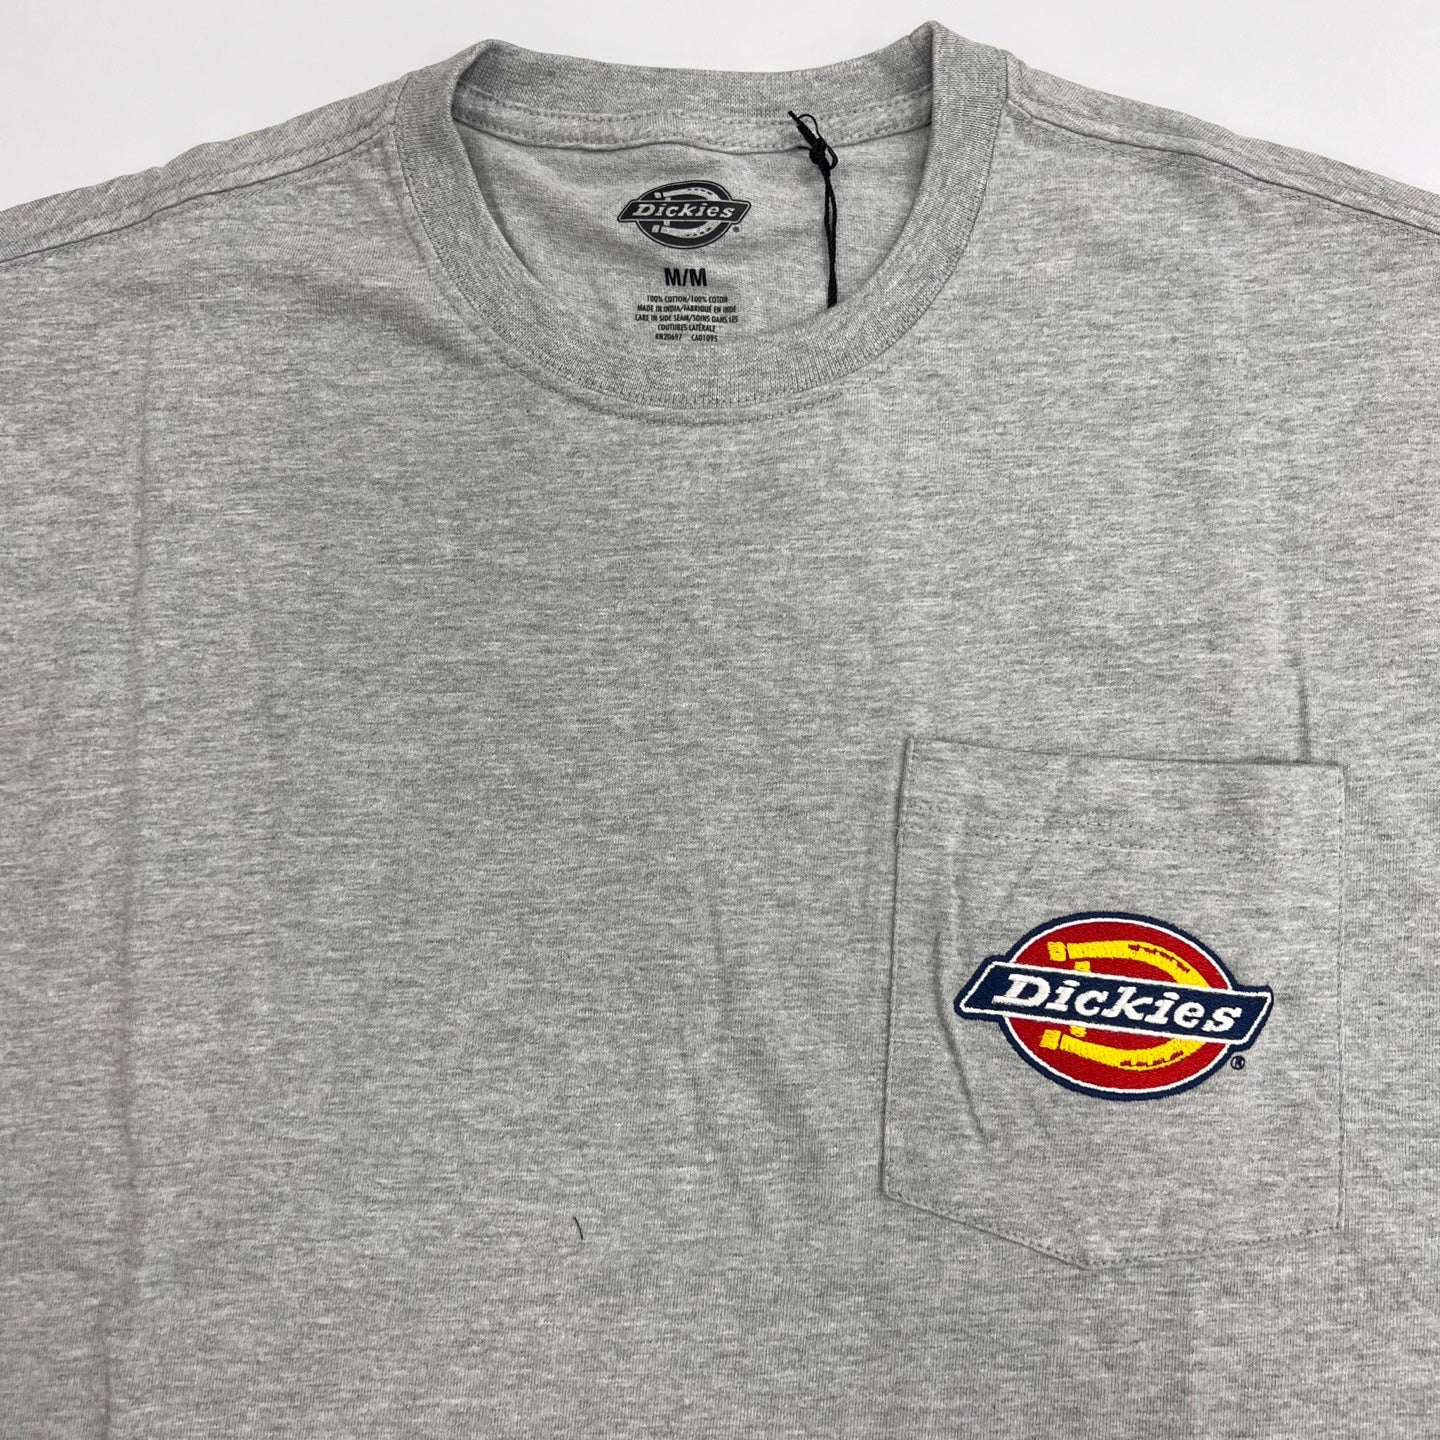 Dickies Logo Pocket Graphic Tee in White at Nordstrom, Size Medium